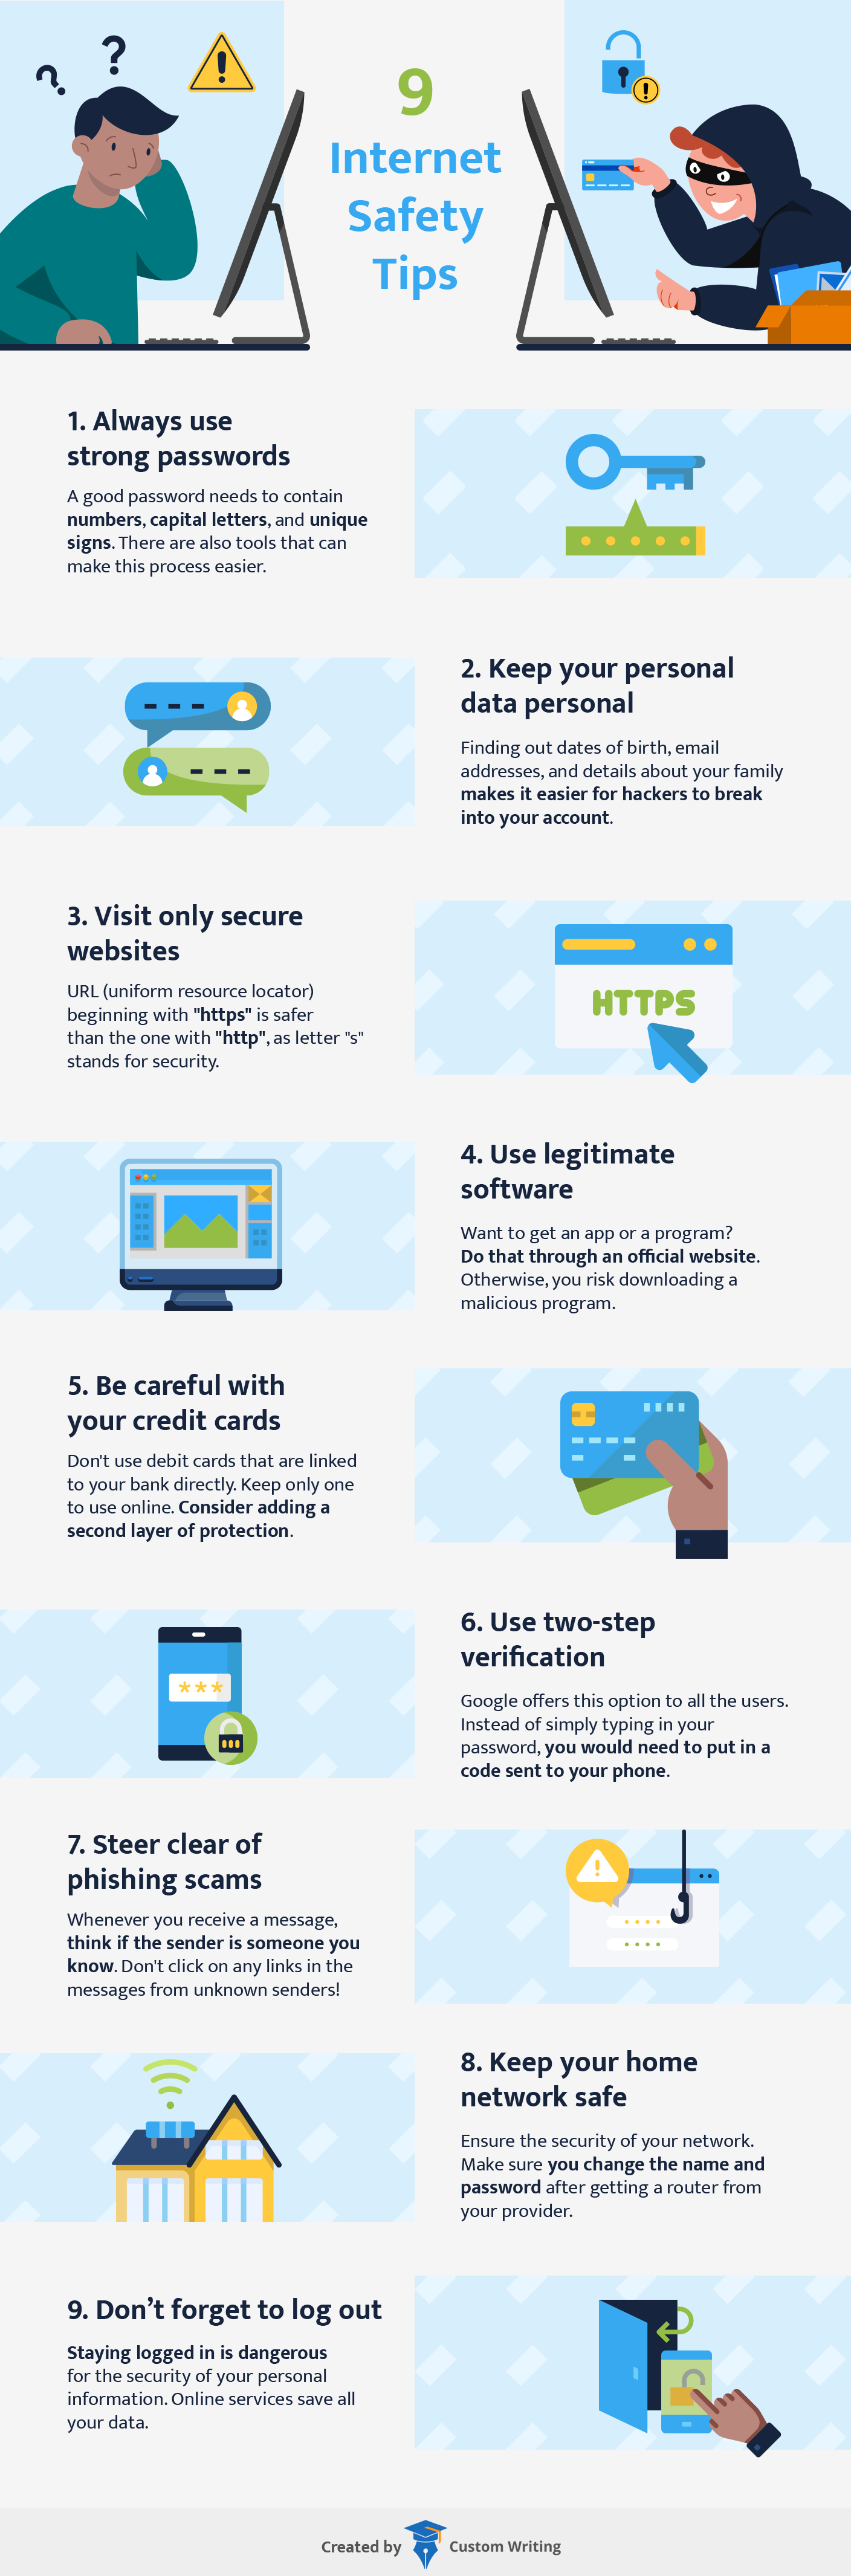 The infographic contains nine online safety tips that are easy to incorporate into your daily life. 